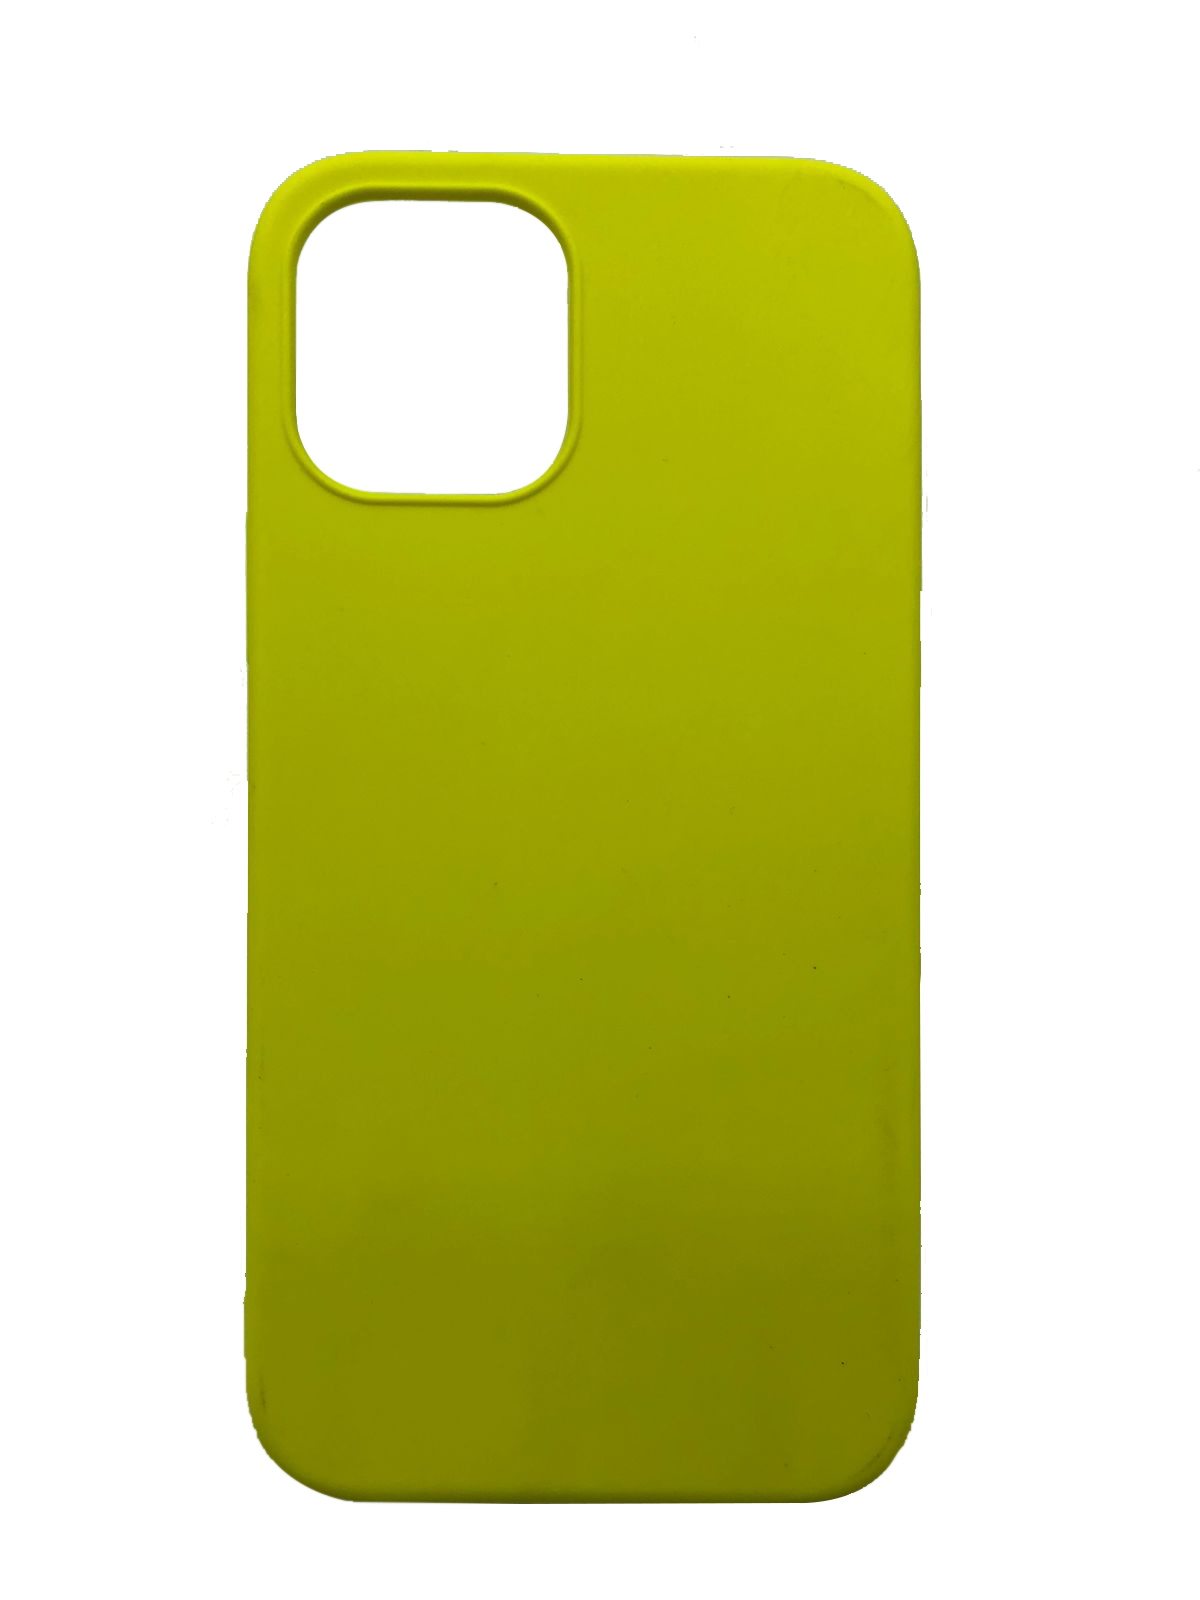 Silicone Case iPHONE 12 PRO  YELLOW